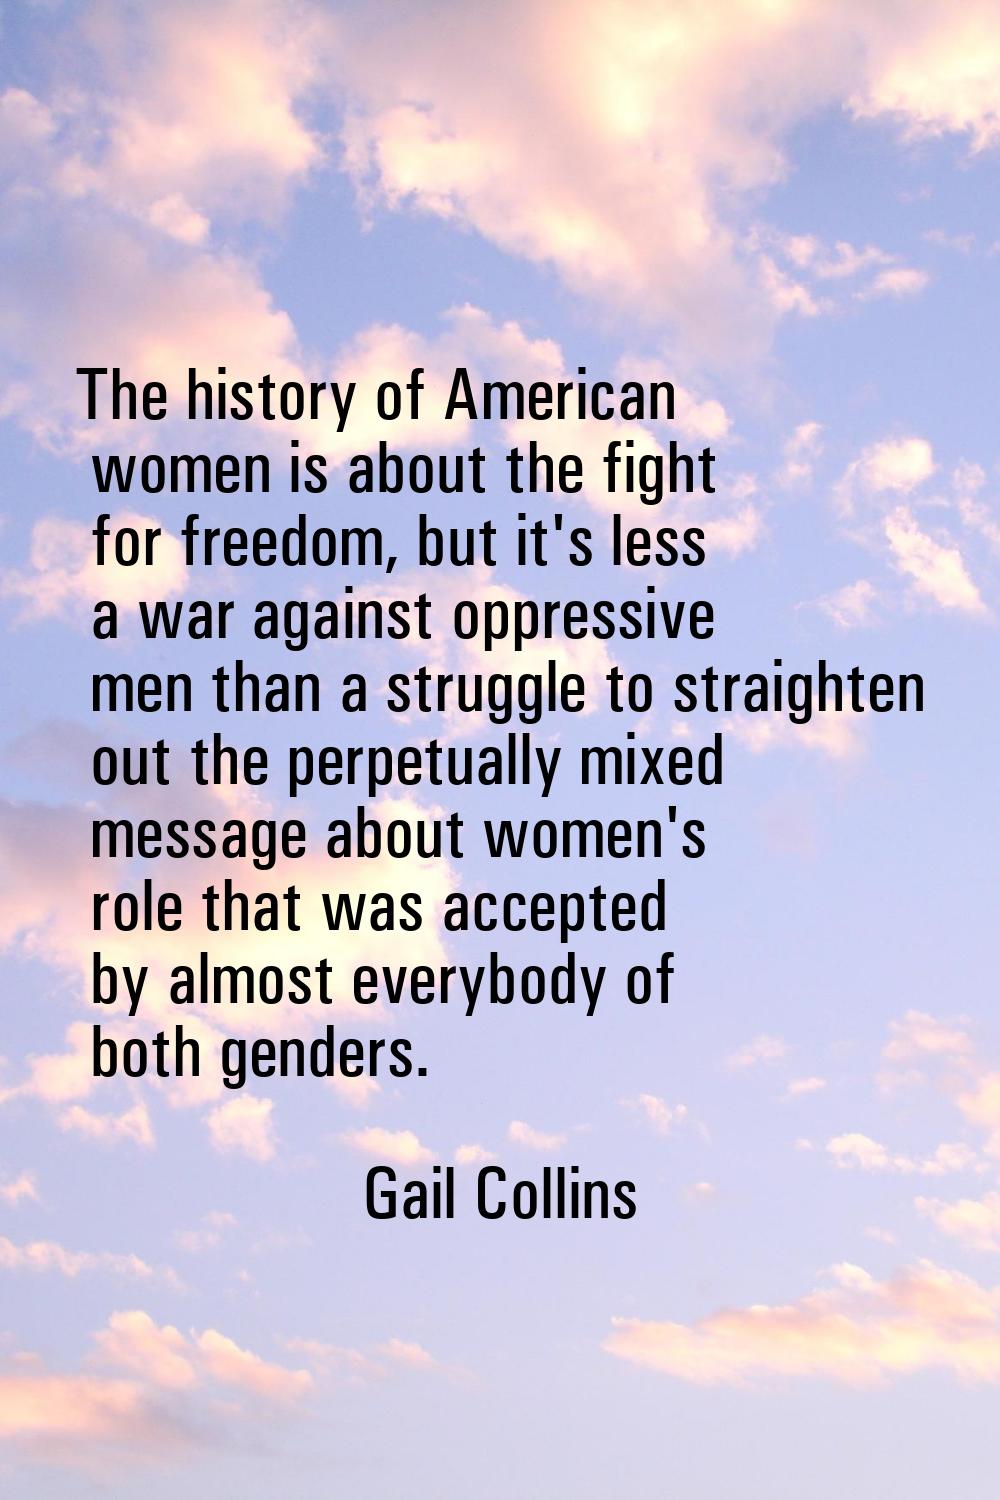 The history of American women is about the fight for freedom, but it's less a war against oppressiv